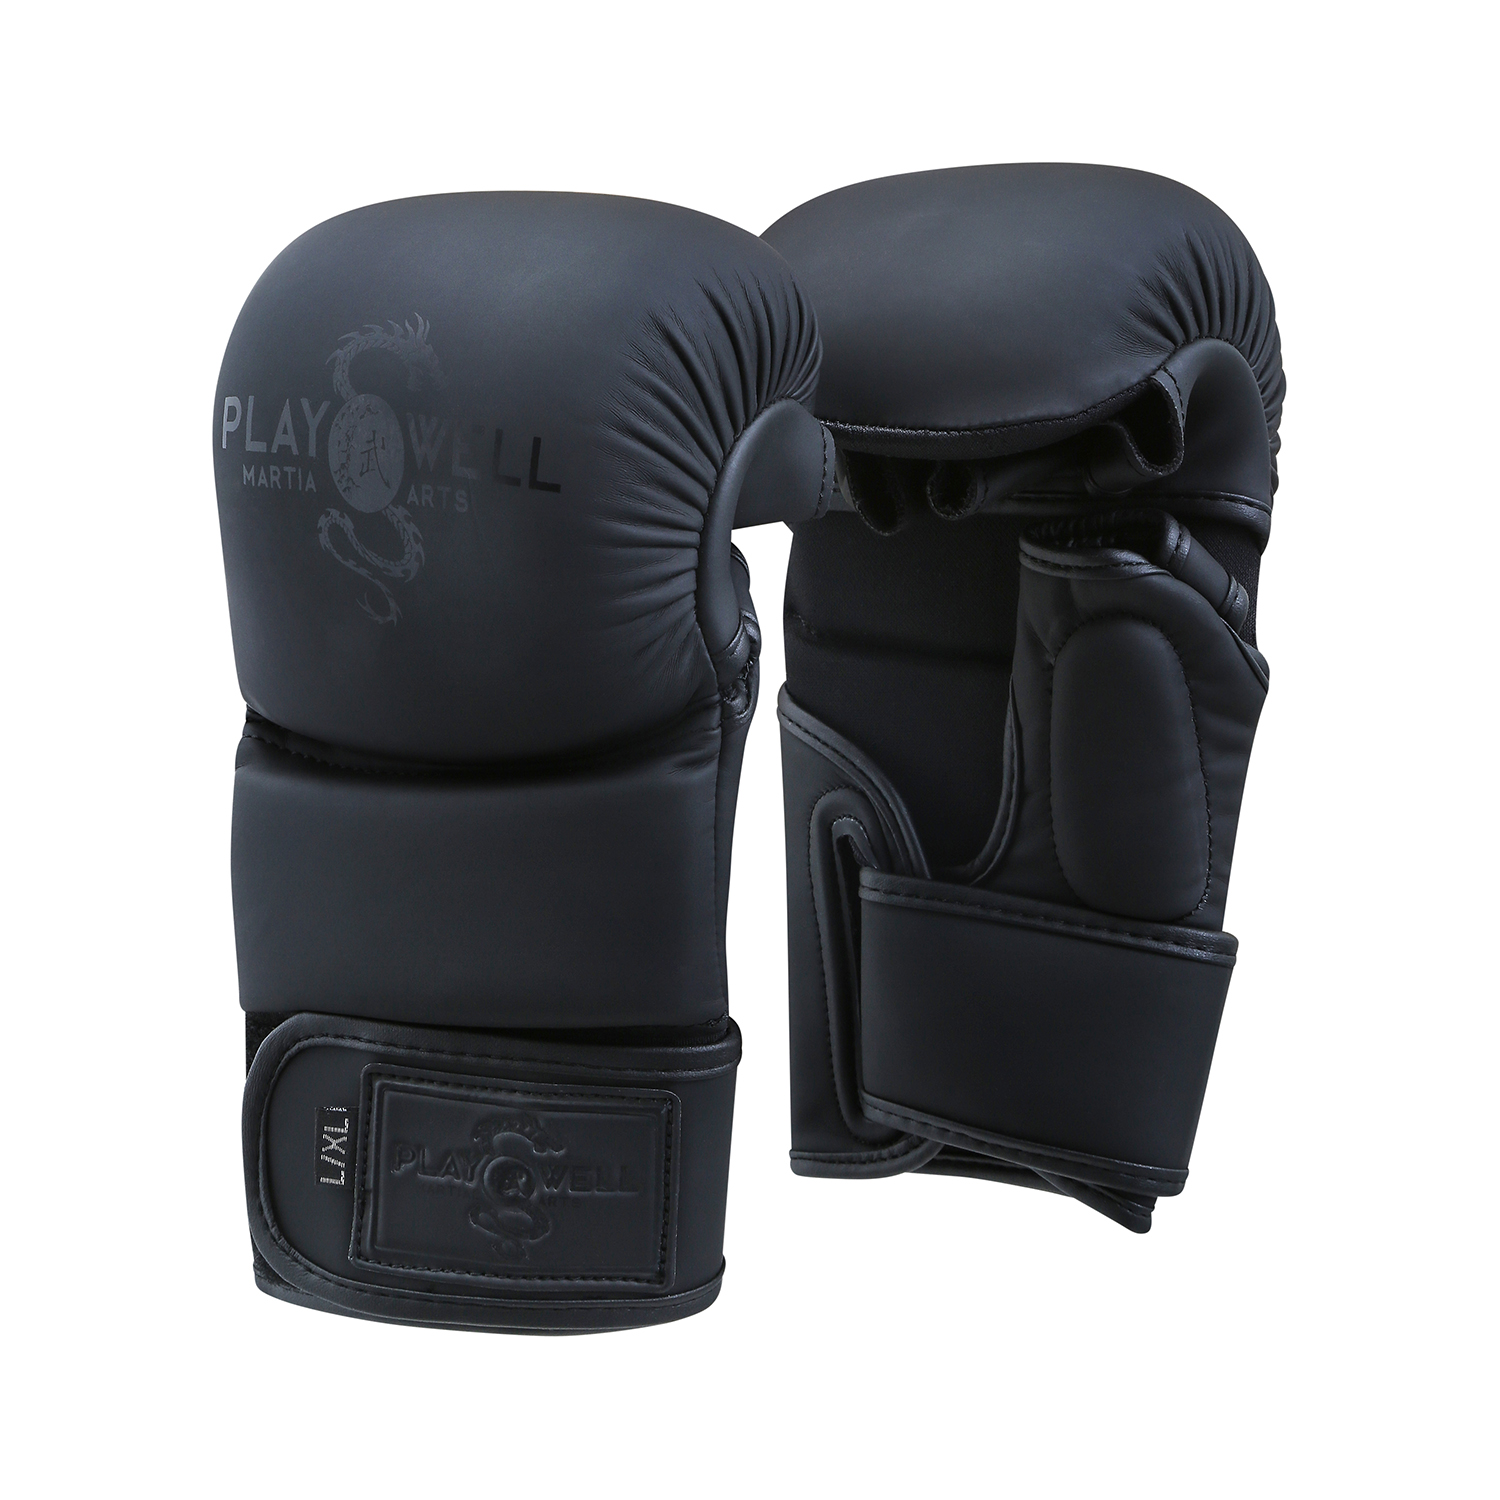 Playwell MMA "Matte Series" 7oz Sparring Gloves - Black/Black - Click Image to Close